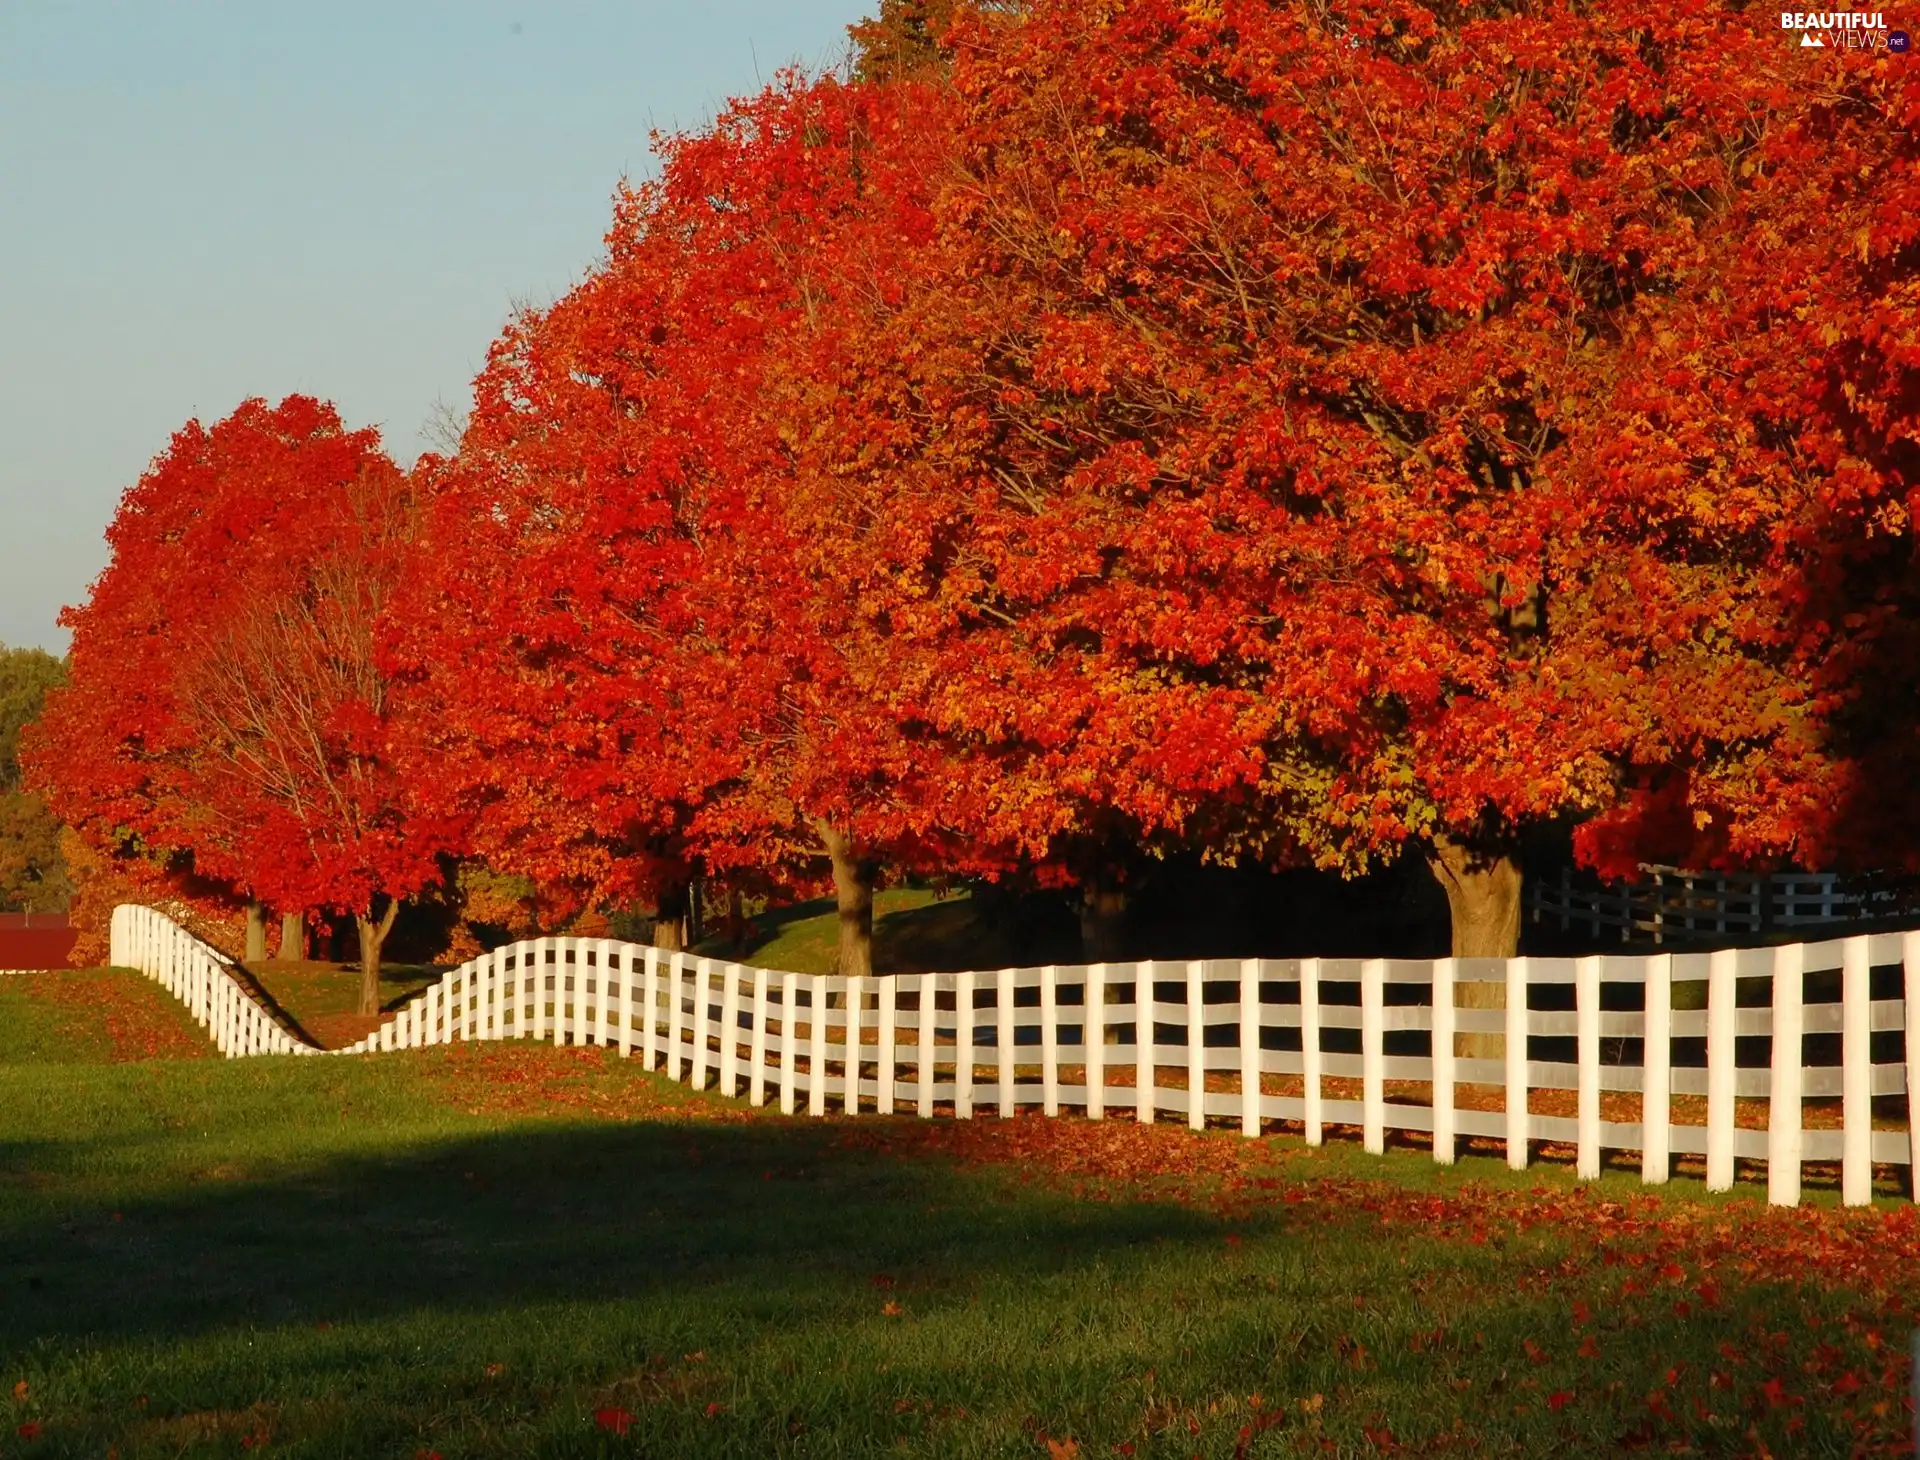 viewes, fence, Autumn, trees, beatyfull